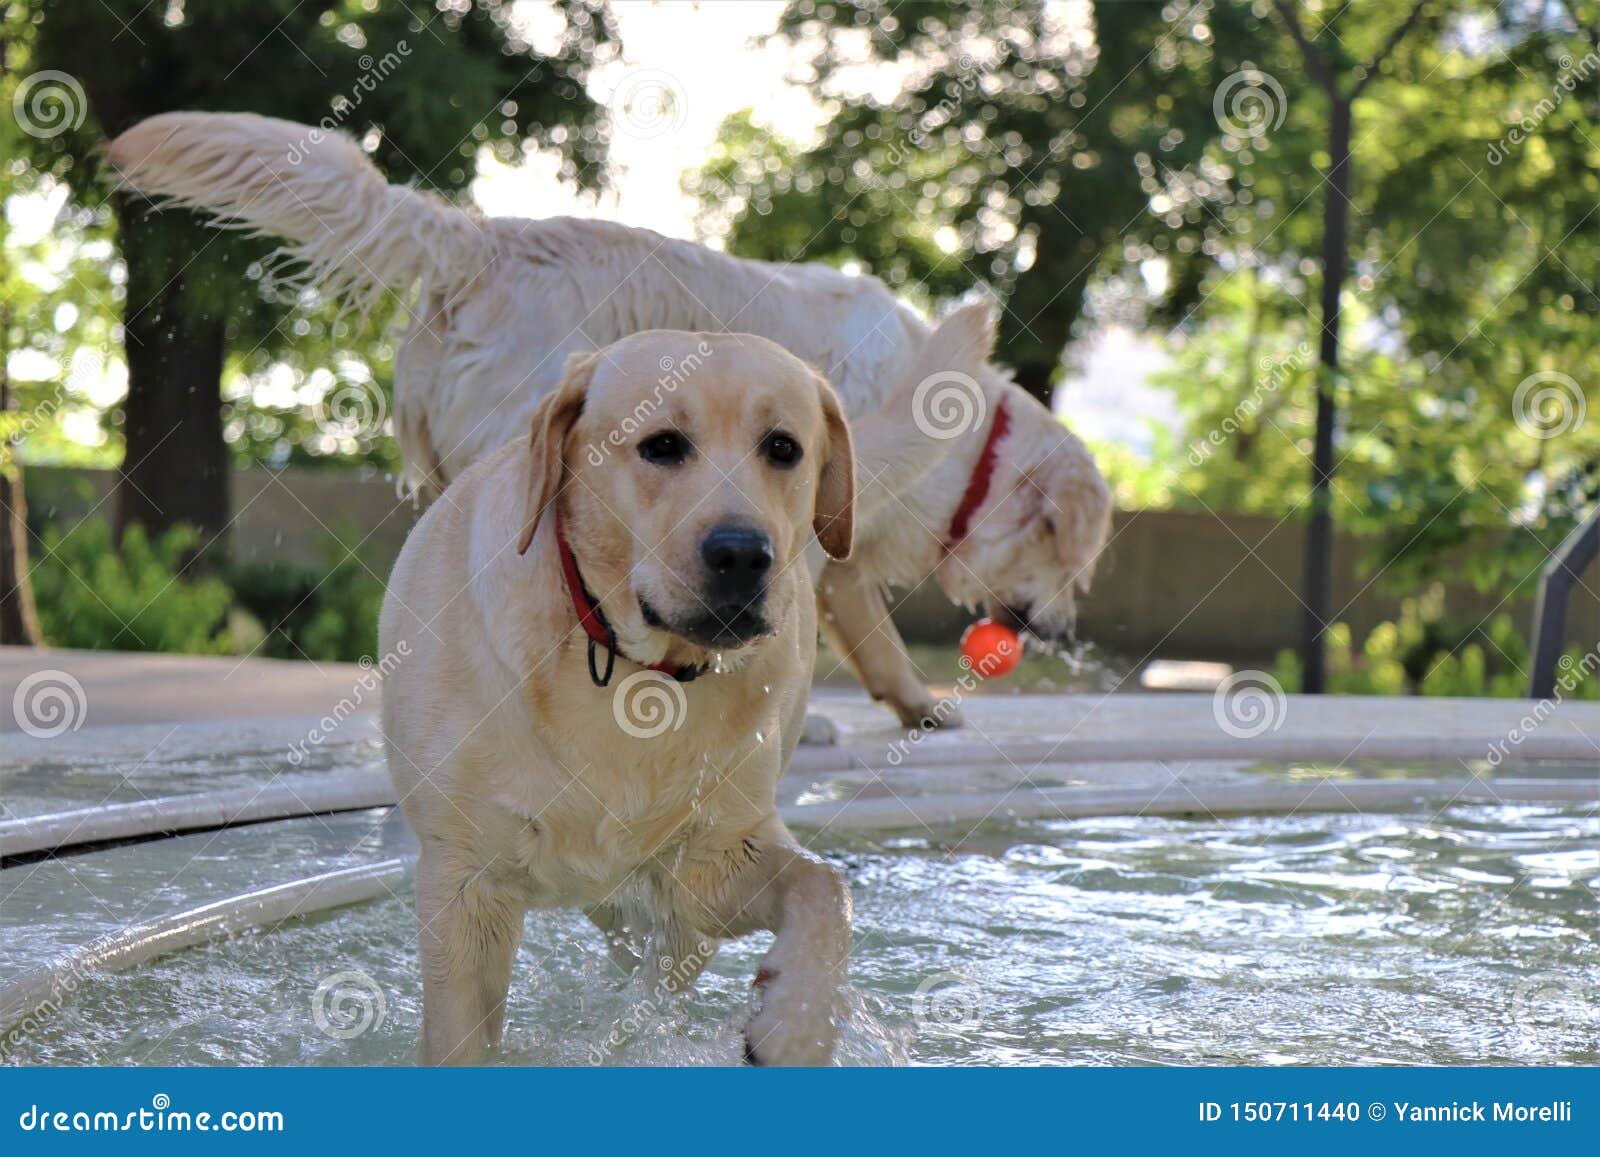 A Dog To Try To Cool Off Takes A Bath In A Fountain Inside A